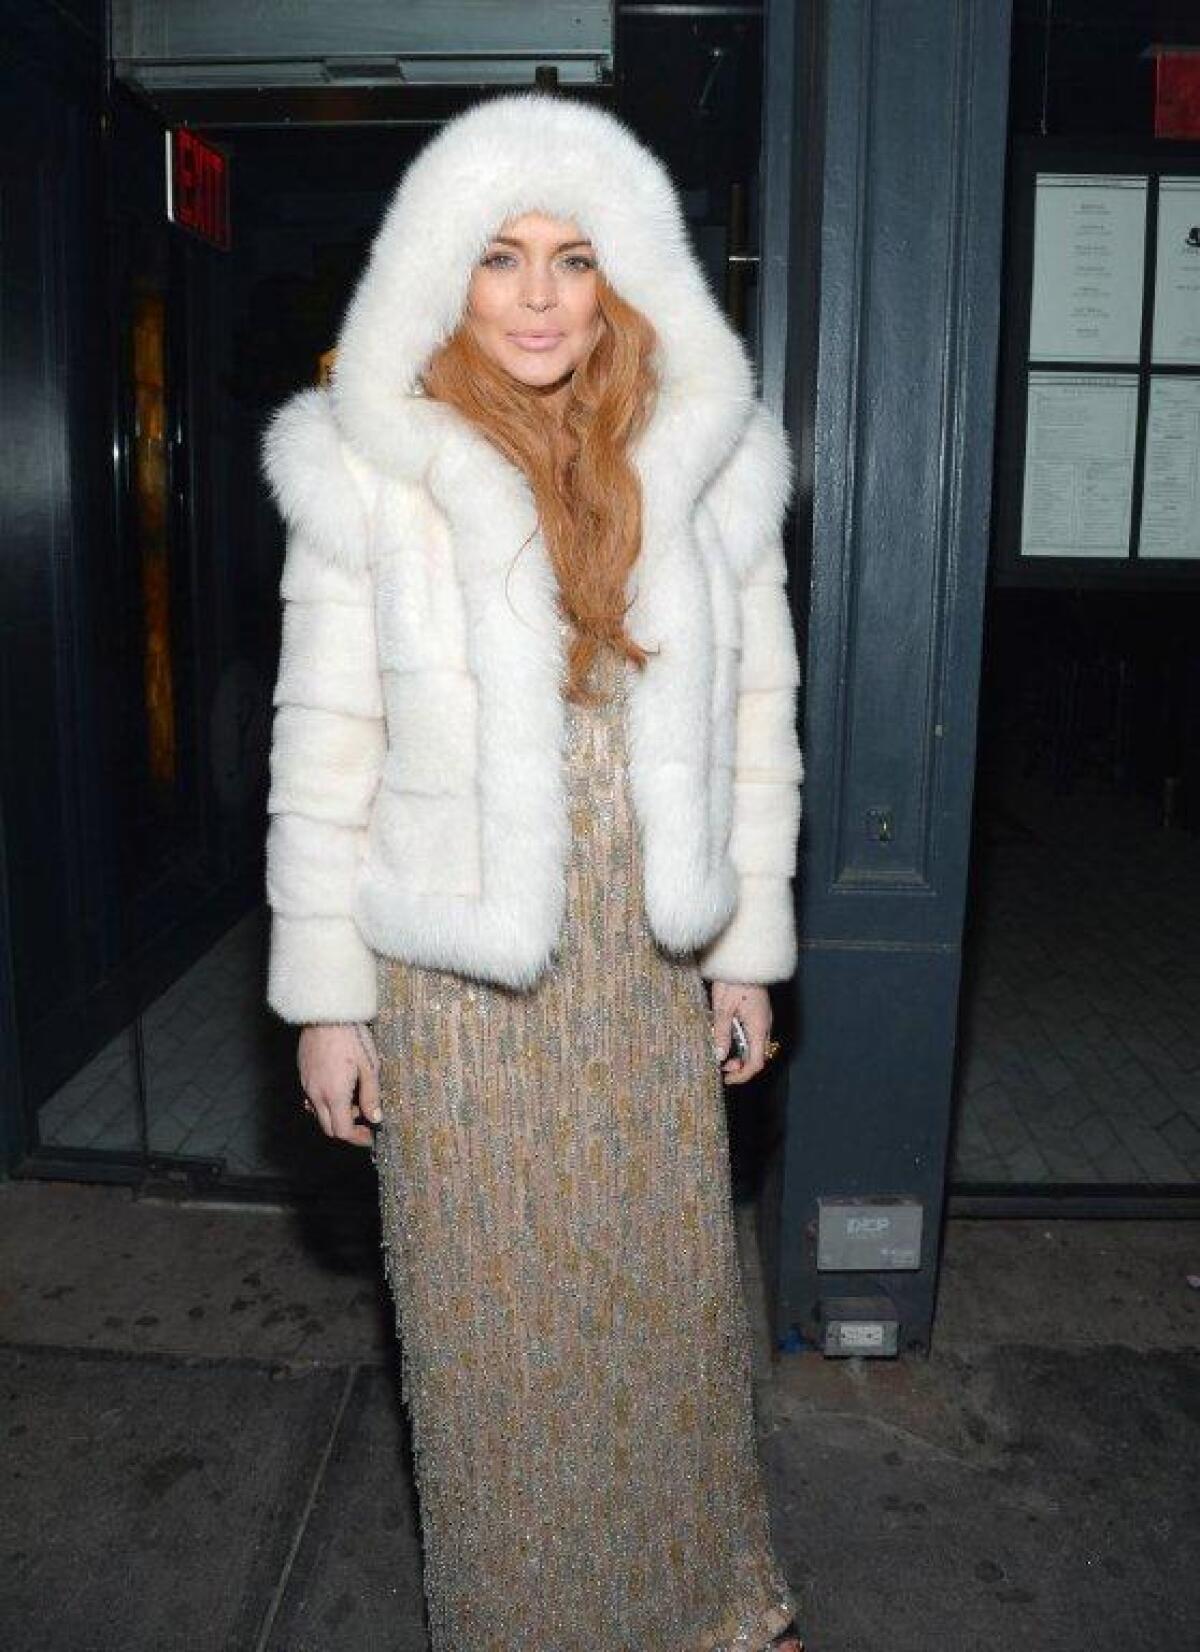 Lindsay Lohan looks ready for Winter Storm Nemo to hit as she poses in a fur hoodie at the AmFar Gala after-party in New York on Wednesday.